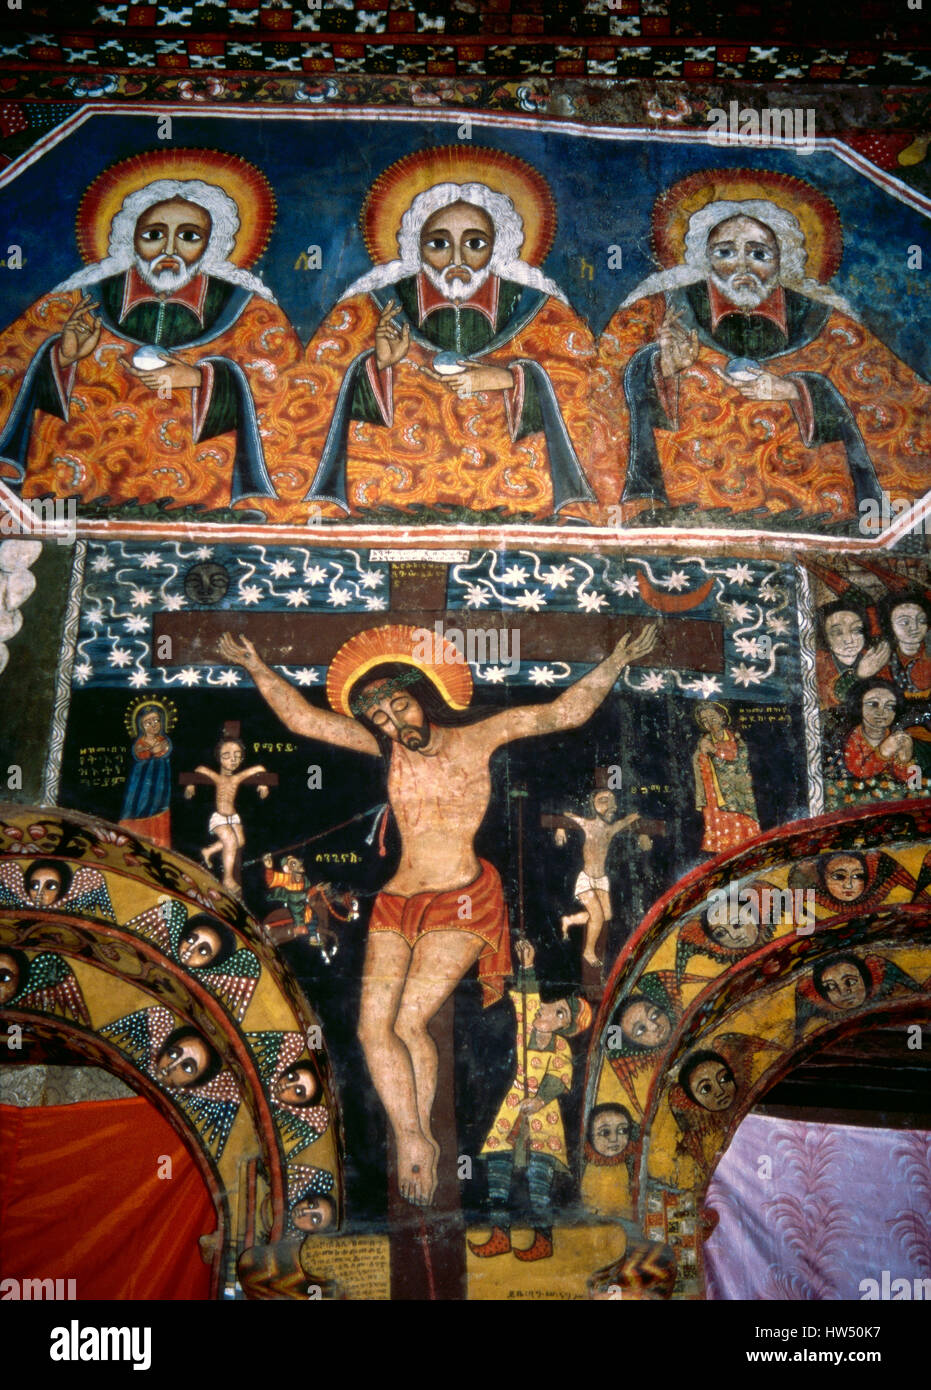 Ethiopia. Gondar. Debre Birhan Selassie Church (Trinity and Mountain of Light). Built under the Emperor Eyasu II, 17th century. Crucified Christ and the Holy Trinity. Fresco. Entrance to the Holy of Holies. Unesco World Heritage Site. Stock Photo